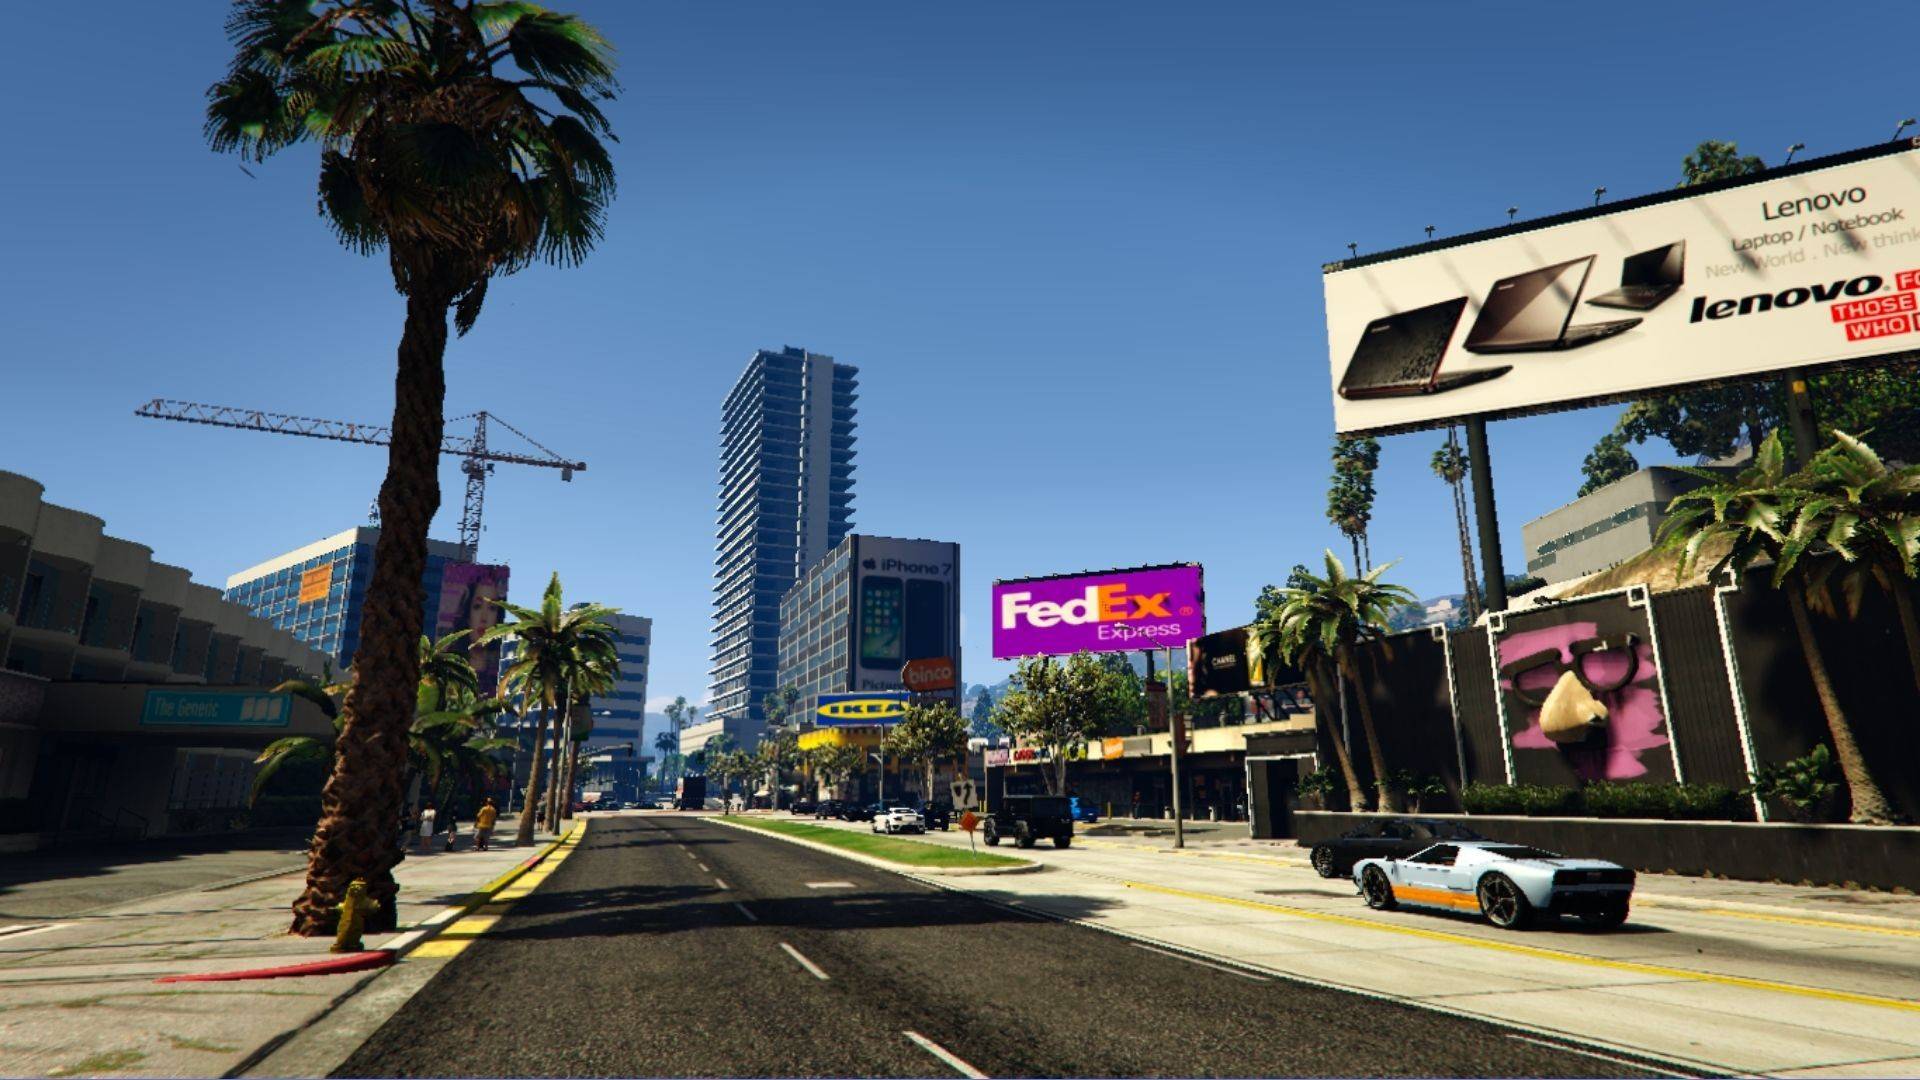 Grand Theft Auto 5 using real life advertisements in games (using a mod)